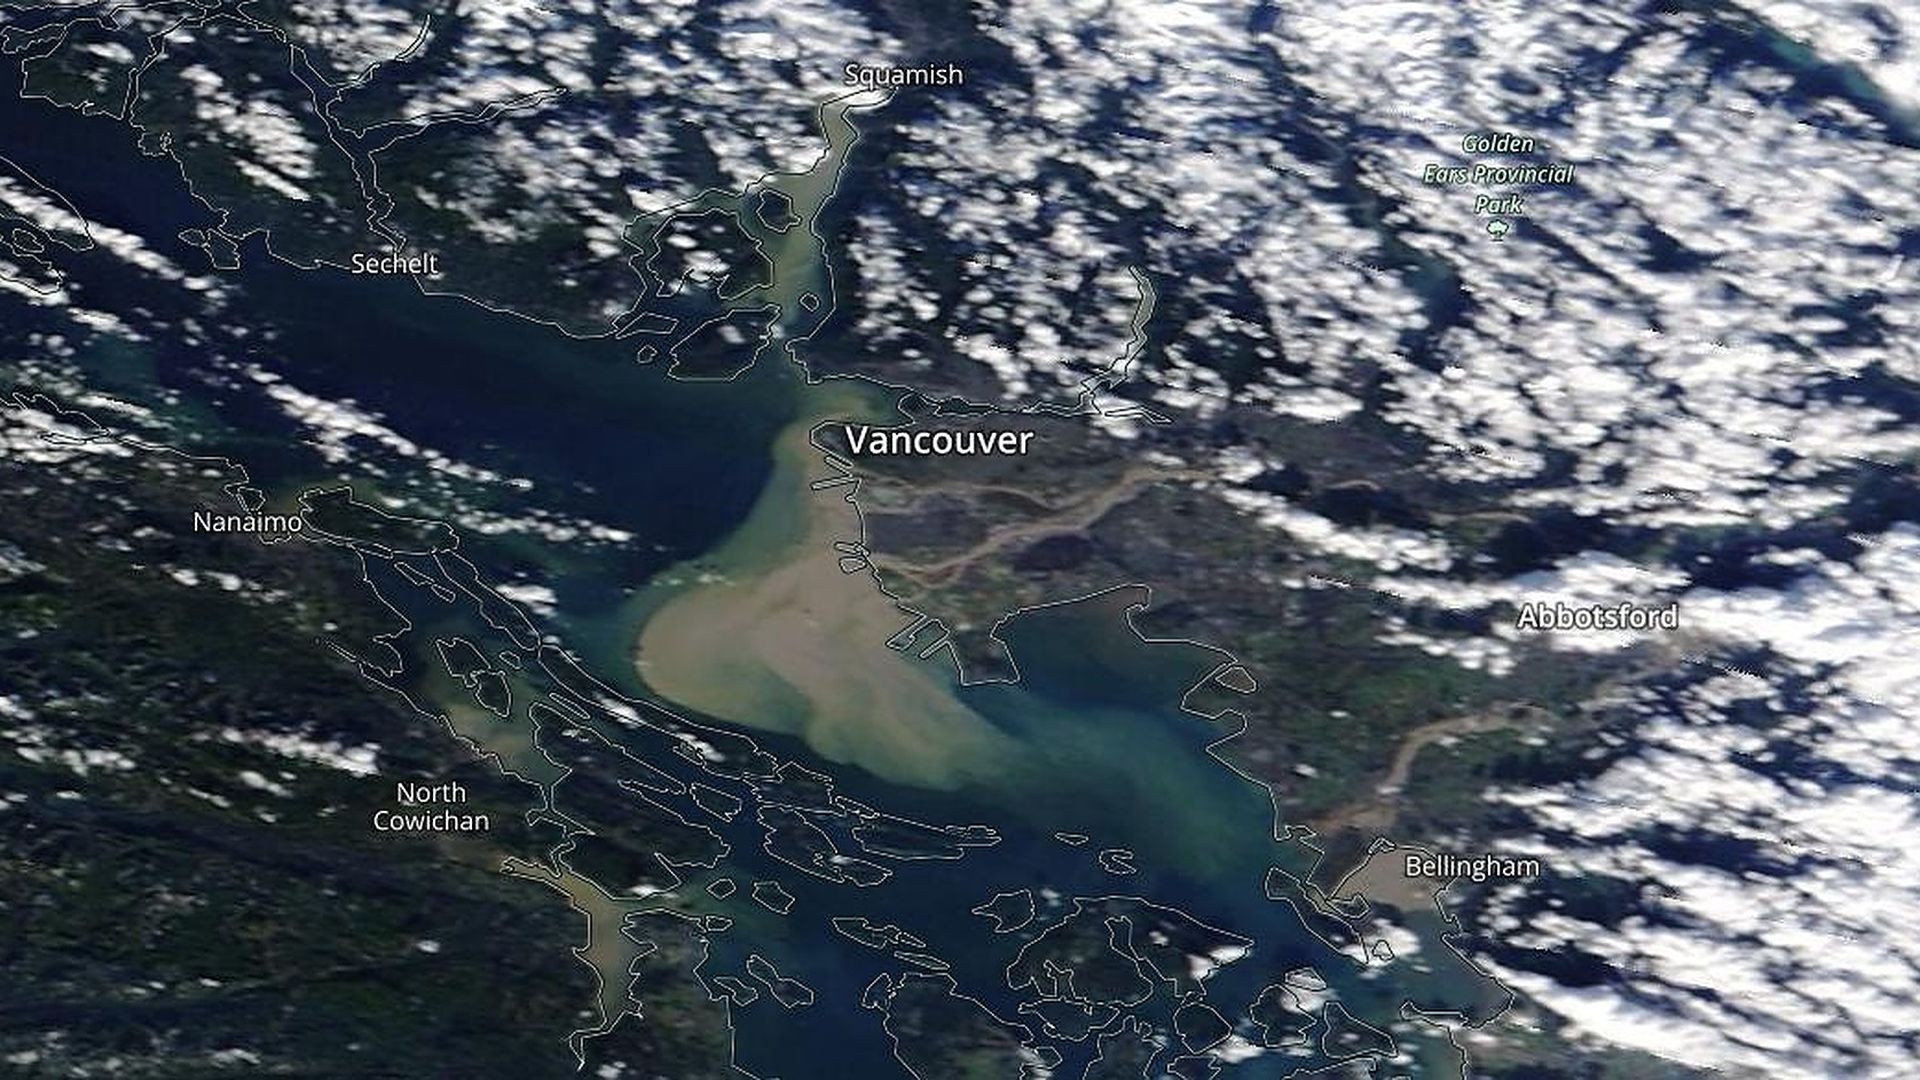 Runoff (dark brown) pours into the waters surrounding Vancouver, B.C. and Bellingham, Washington, causing flooding, as seen from space.